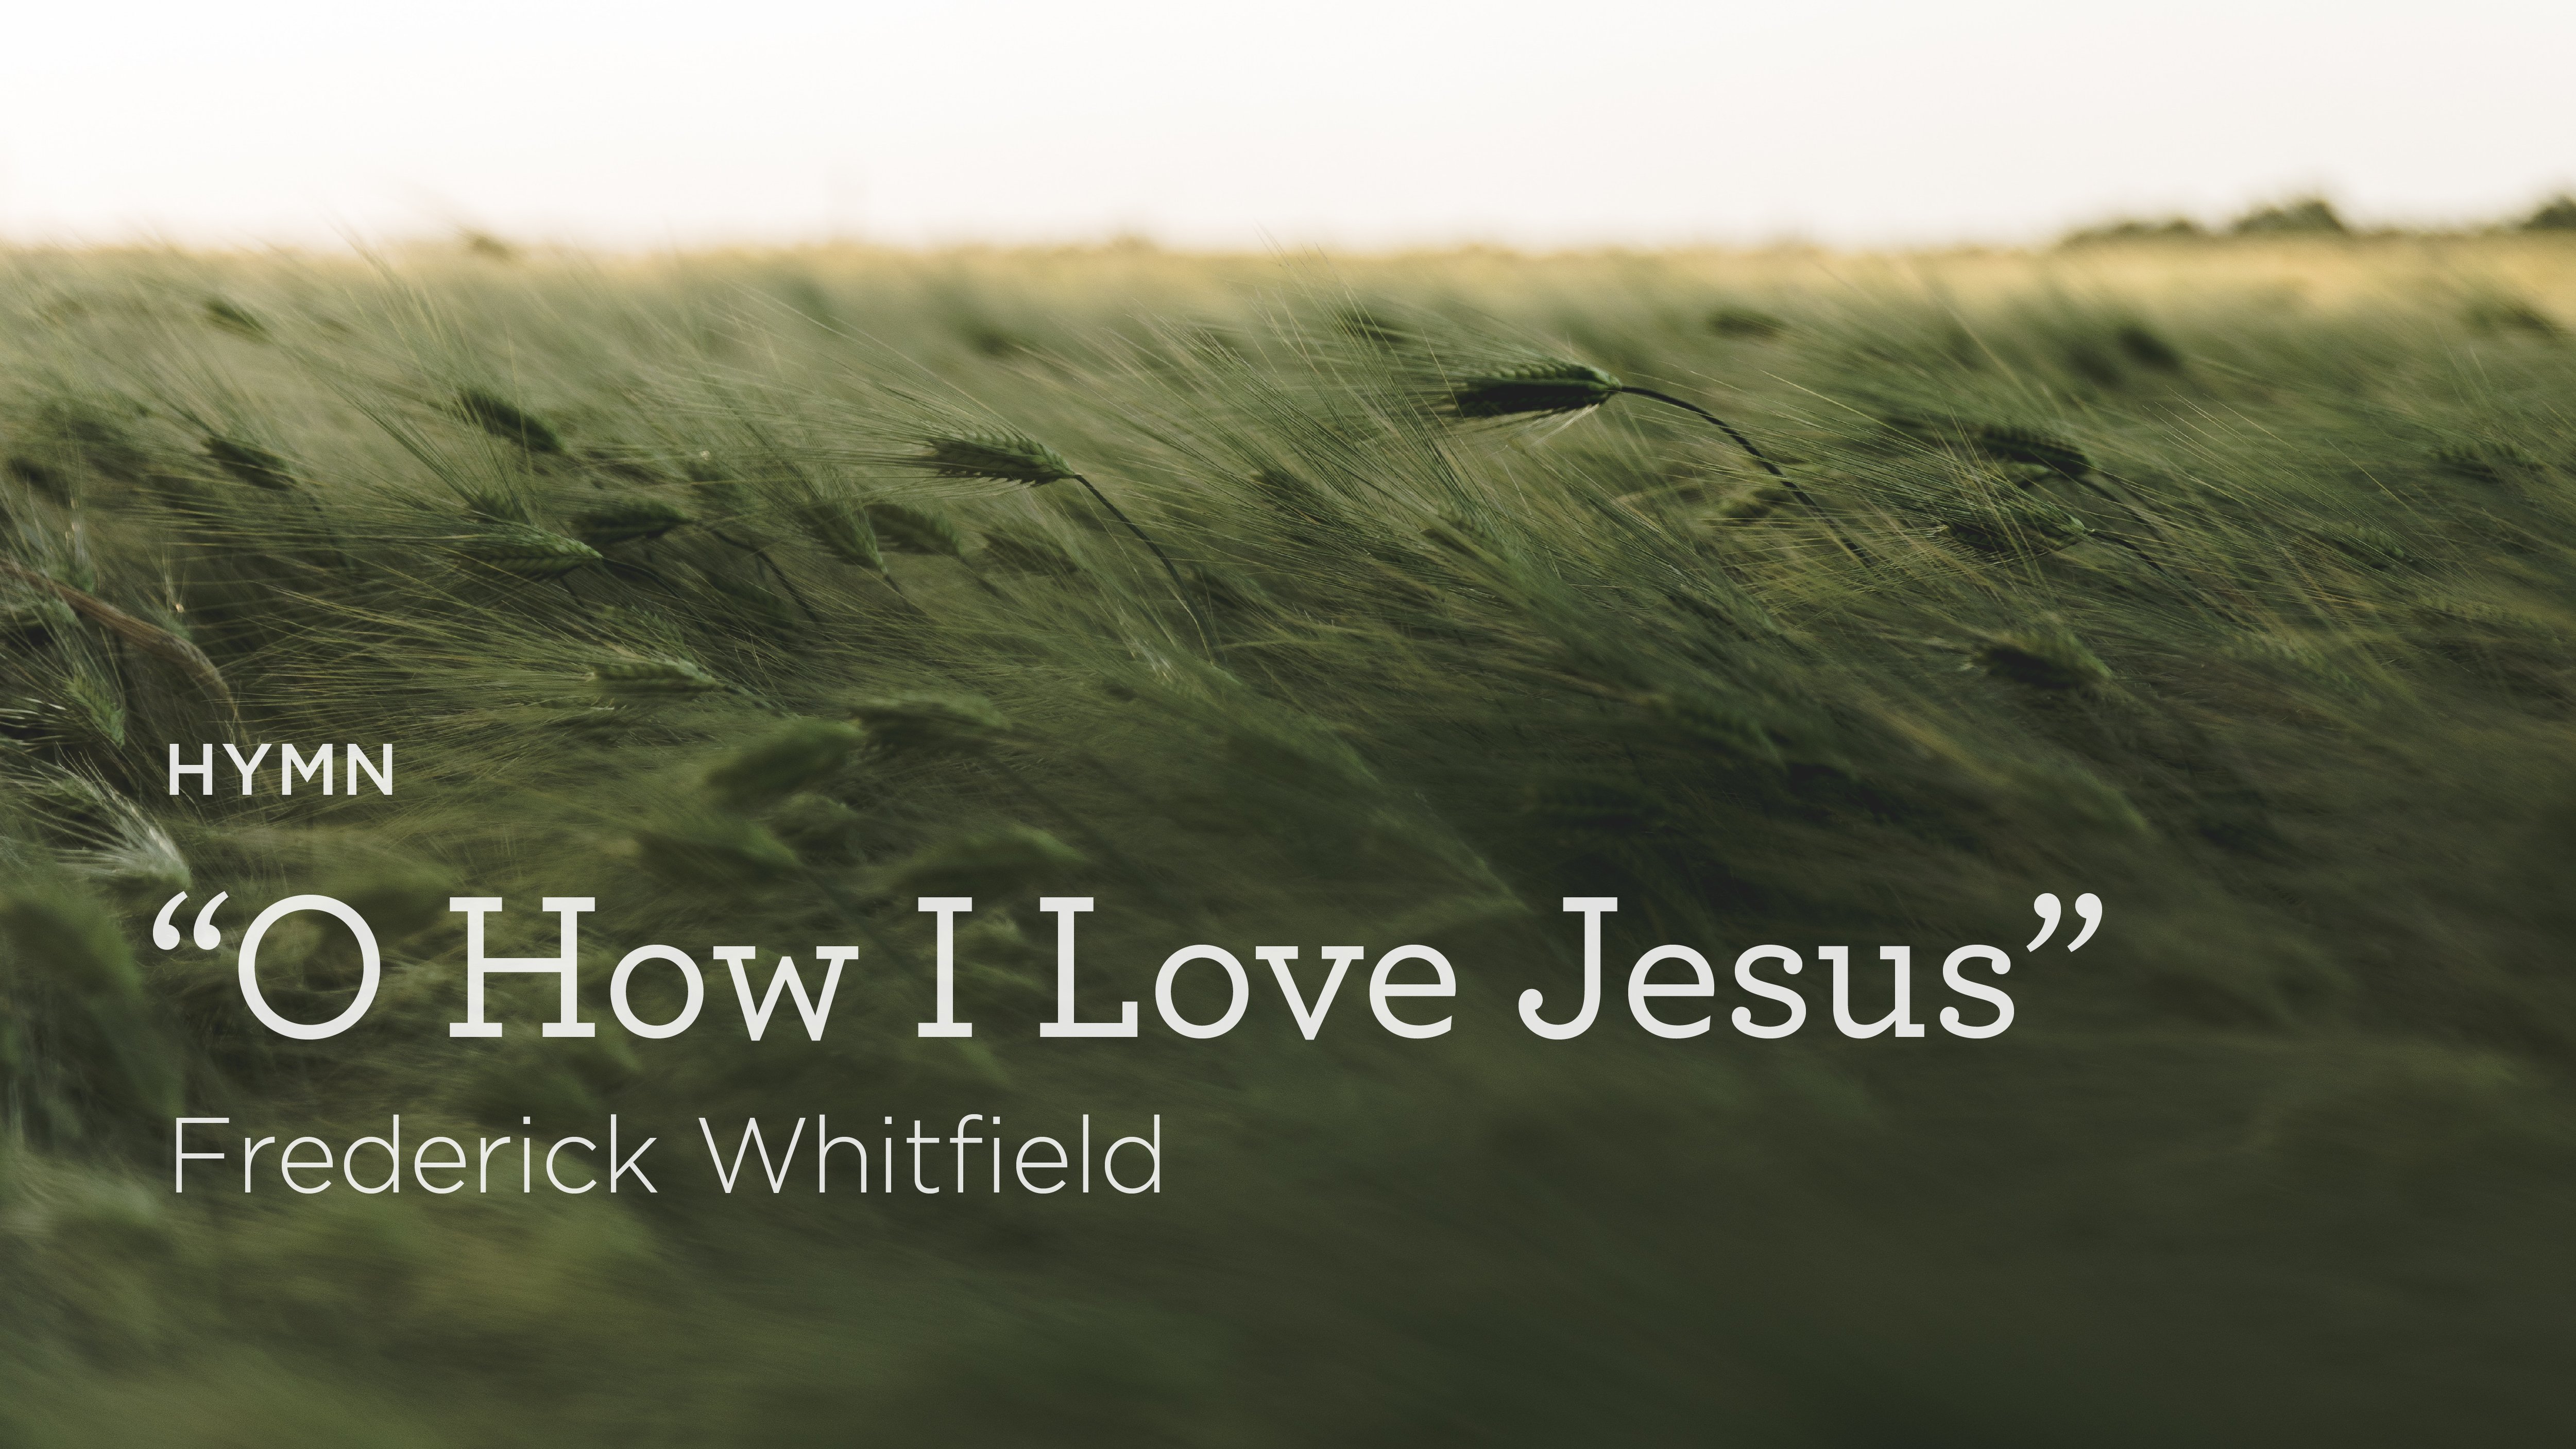 thumbnail image for Hymn: “O How I Love Jesus” by Frederick Whitfield